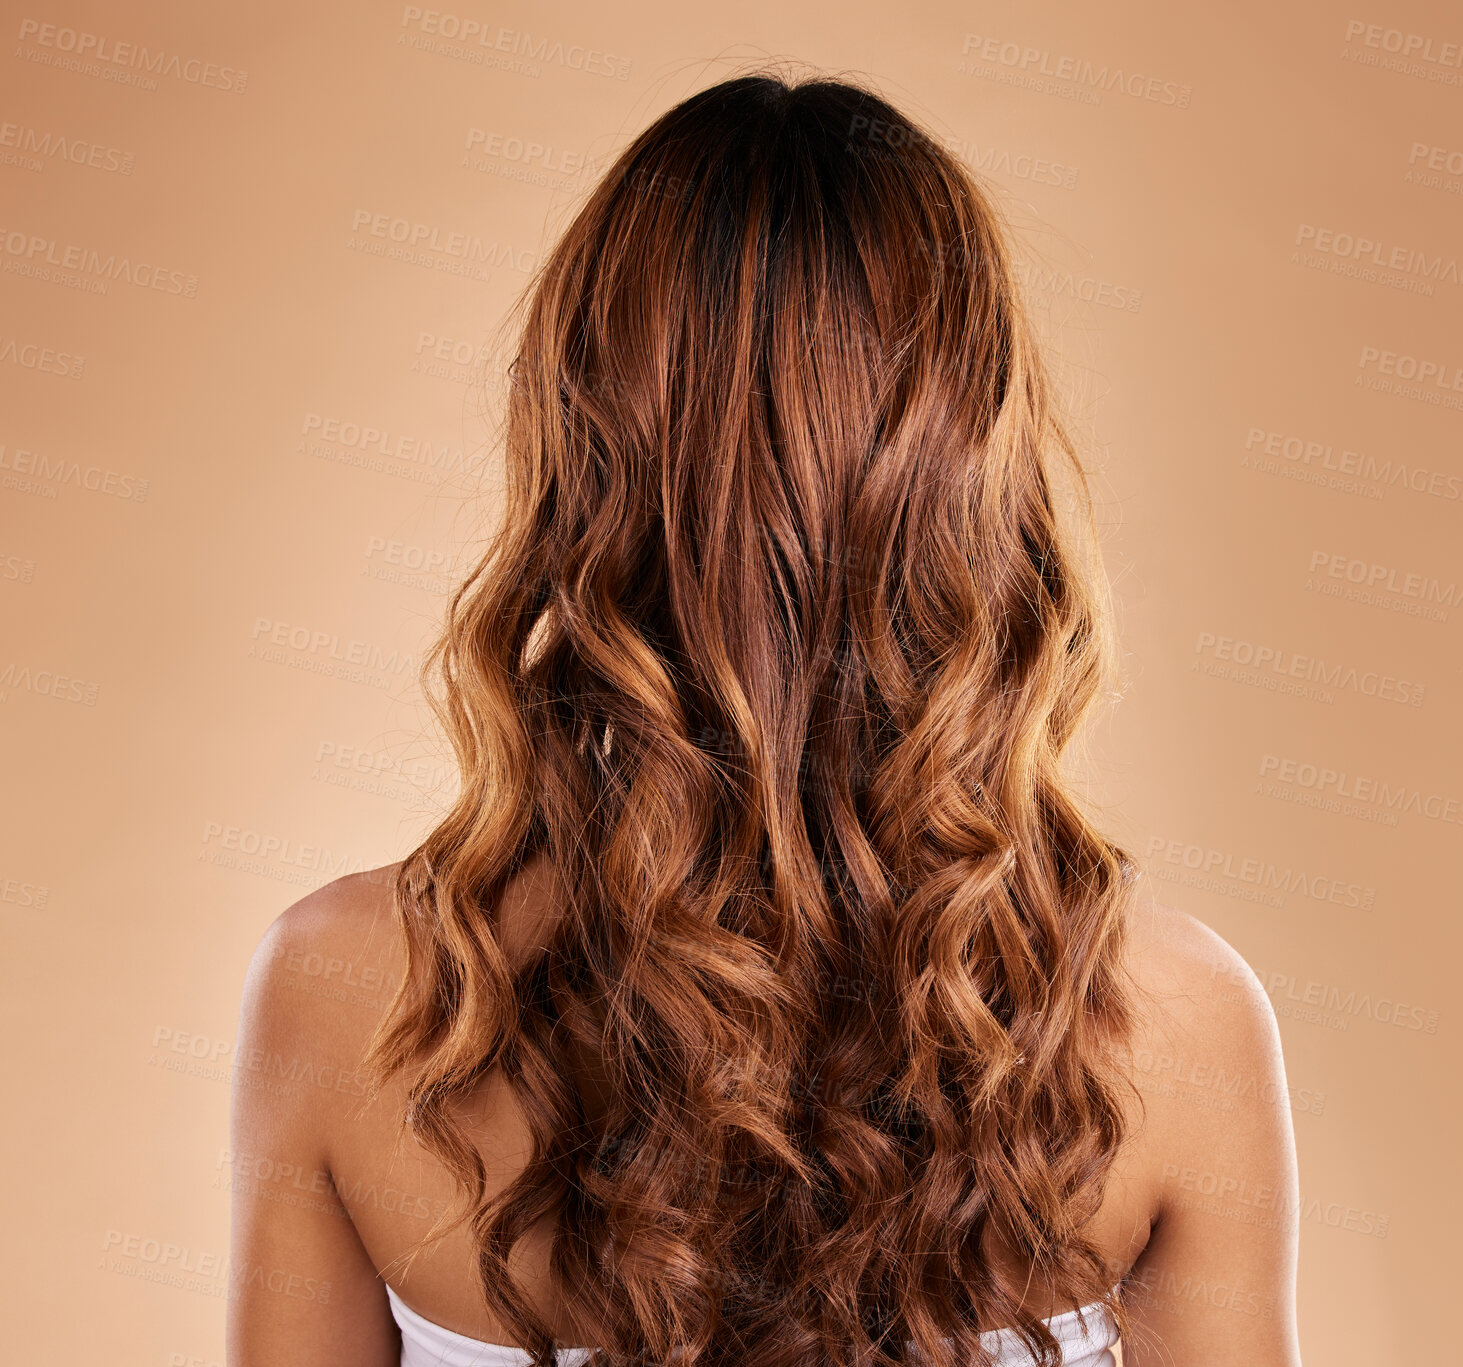 Buy stock photo Haircare, back and beauty of woman with curly hair in studio isolated on a brown background. Texture, growth and female model with salon treatment for hairstyle, balayage or extensions and highlights